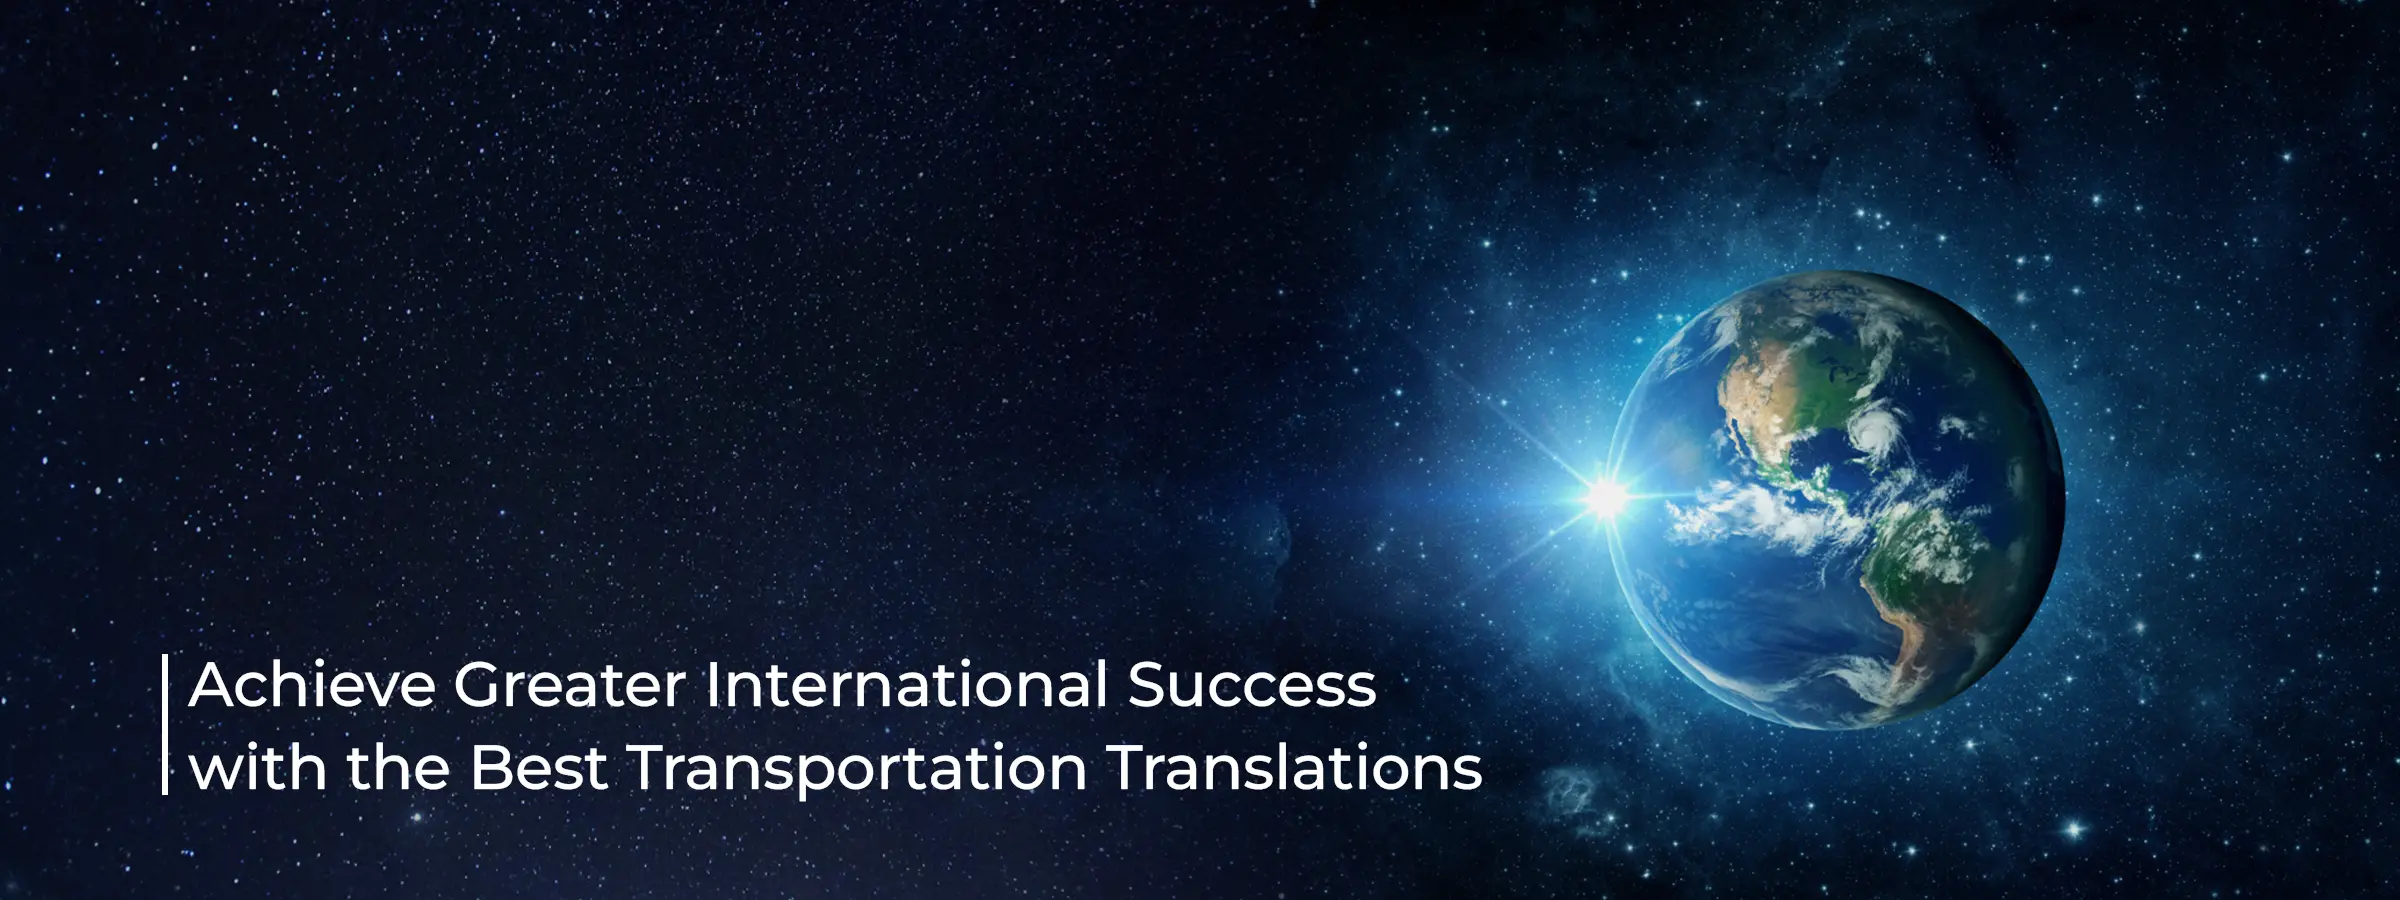 achieve-greater-international-success-with-the-best-transportation-translations